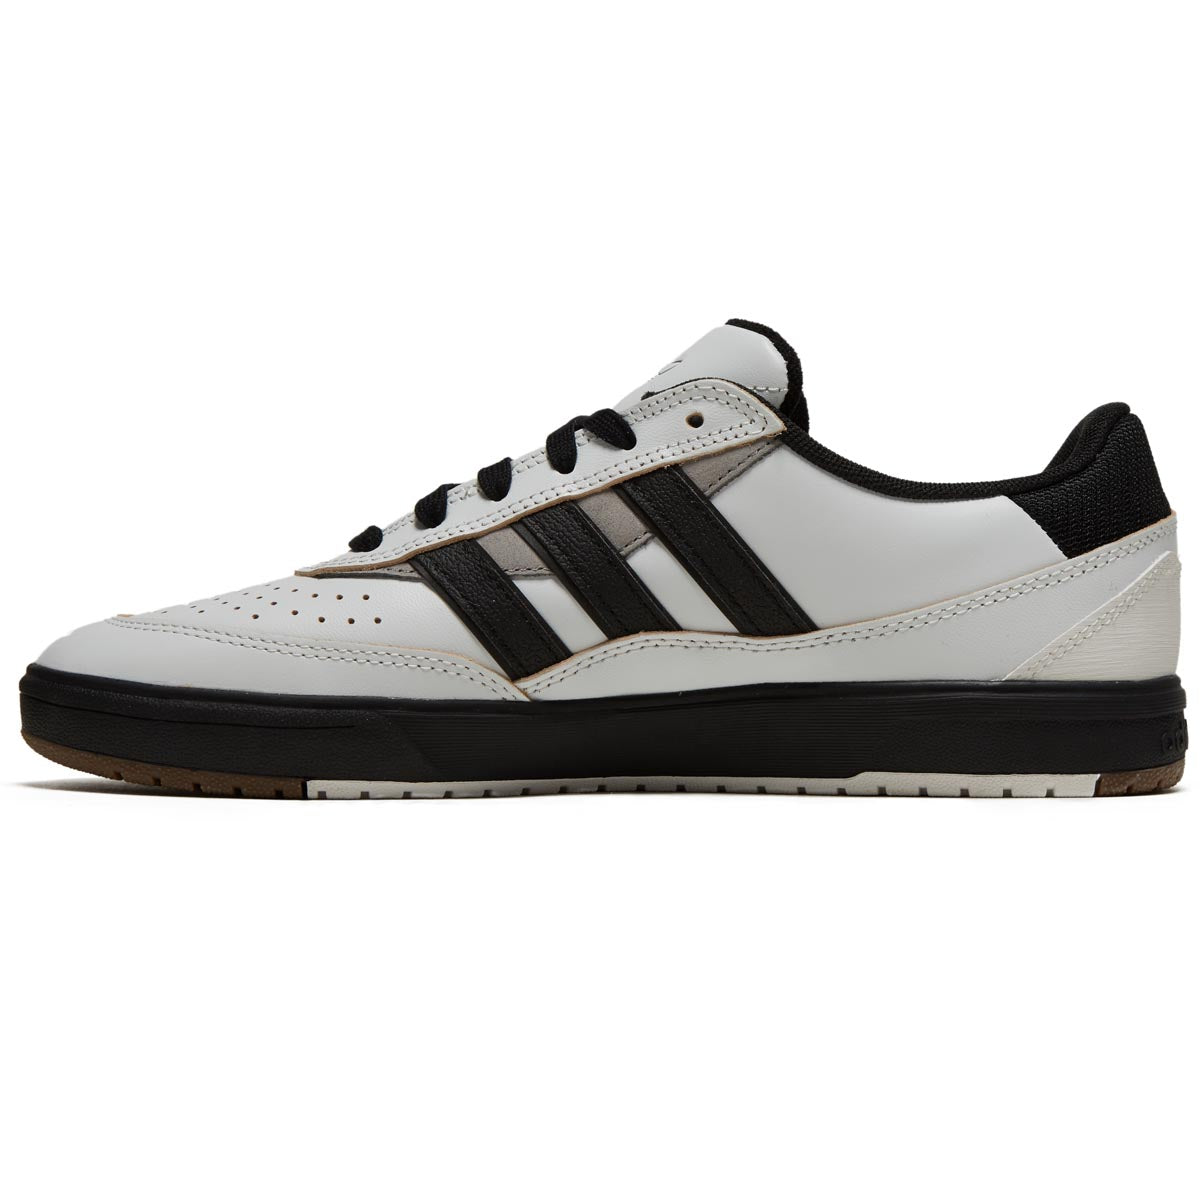 Adidas Tyshawn II Shoes - Crystal White/Black/Charcoal Solid Grey image 2